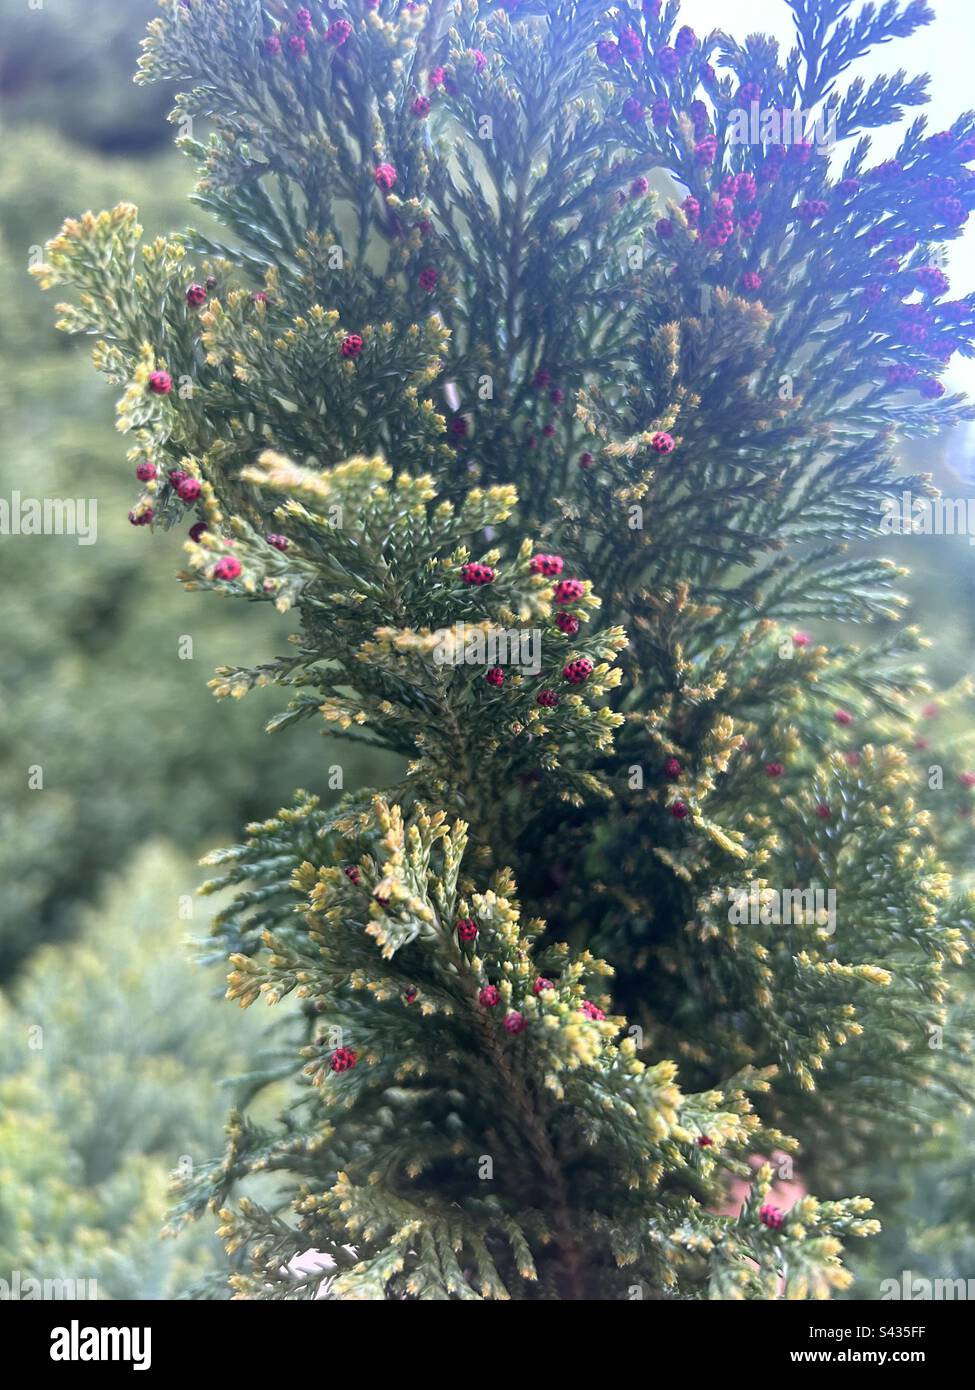 Thuja plicata (Western Red Cedar) with red/Magenta cones in early spring, Liverpool, United Kingdom. Stock Photo